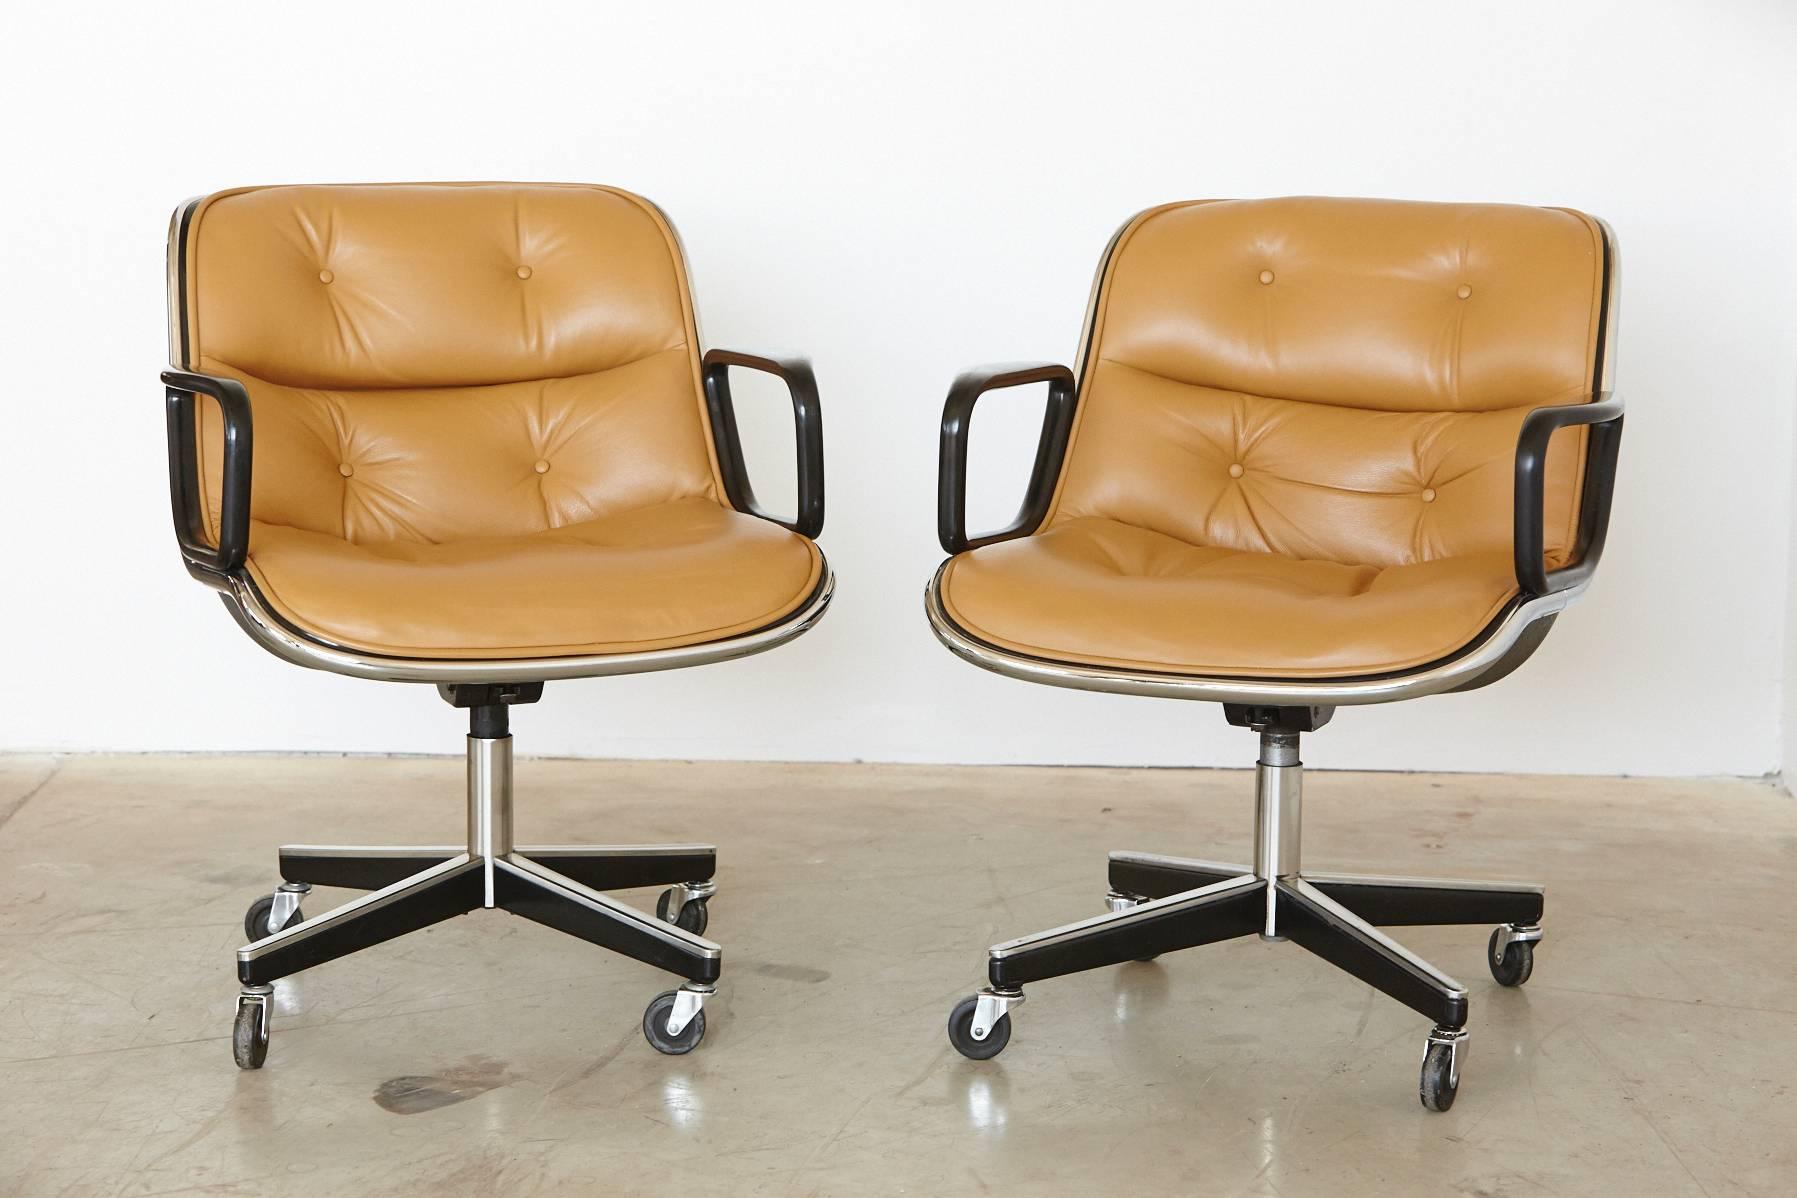 Steel Original Charles Pollock Executive Chair Upholstered in Edelman Leather